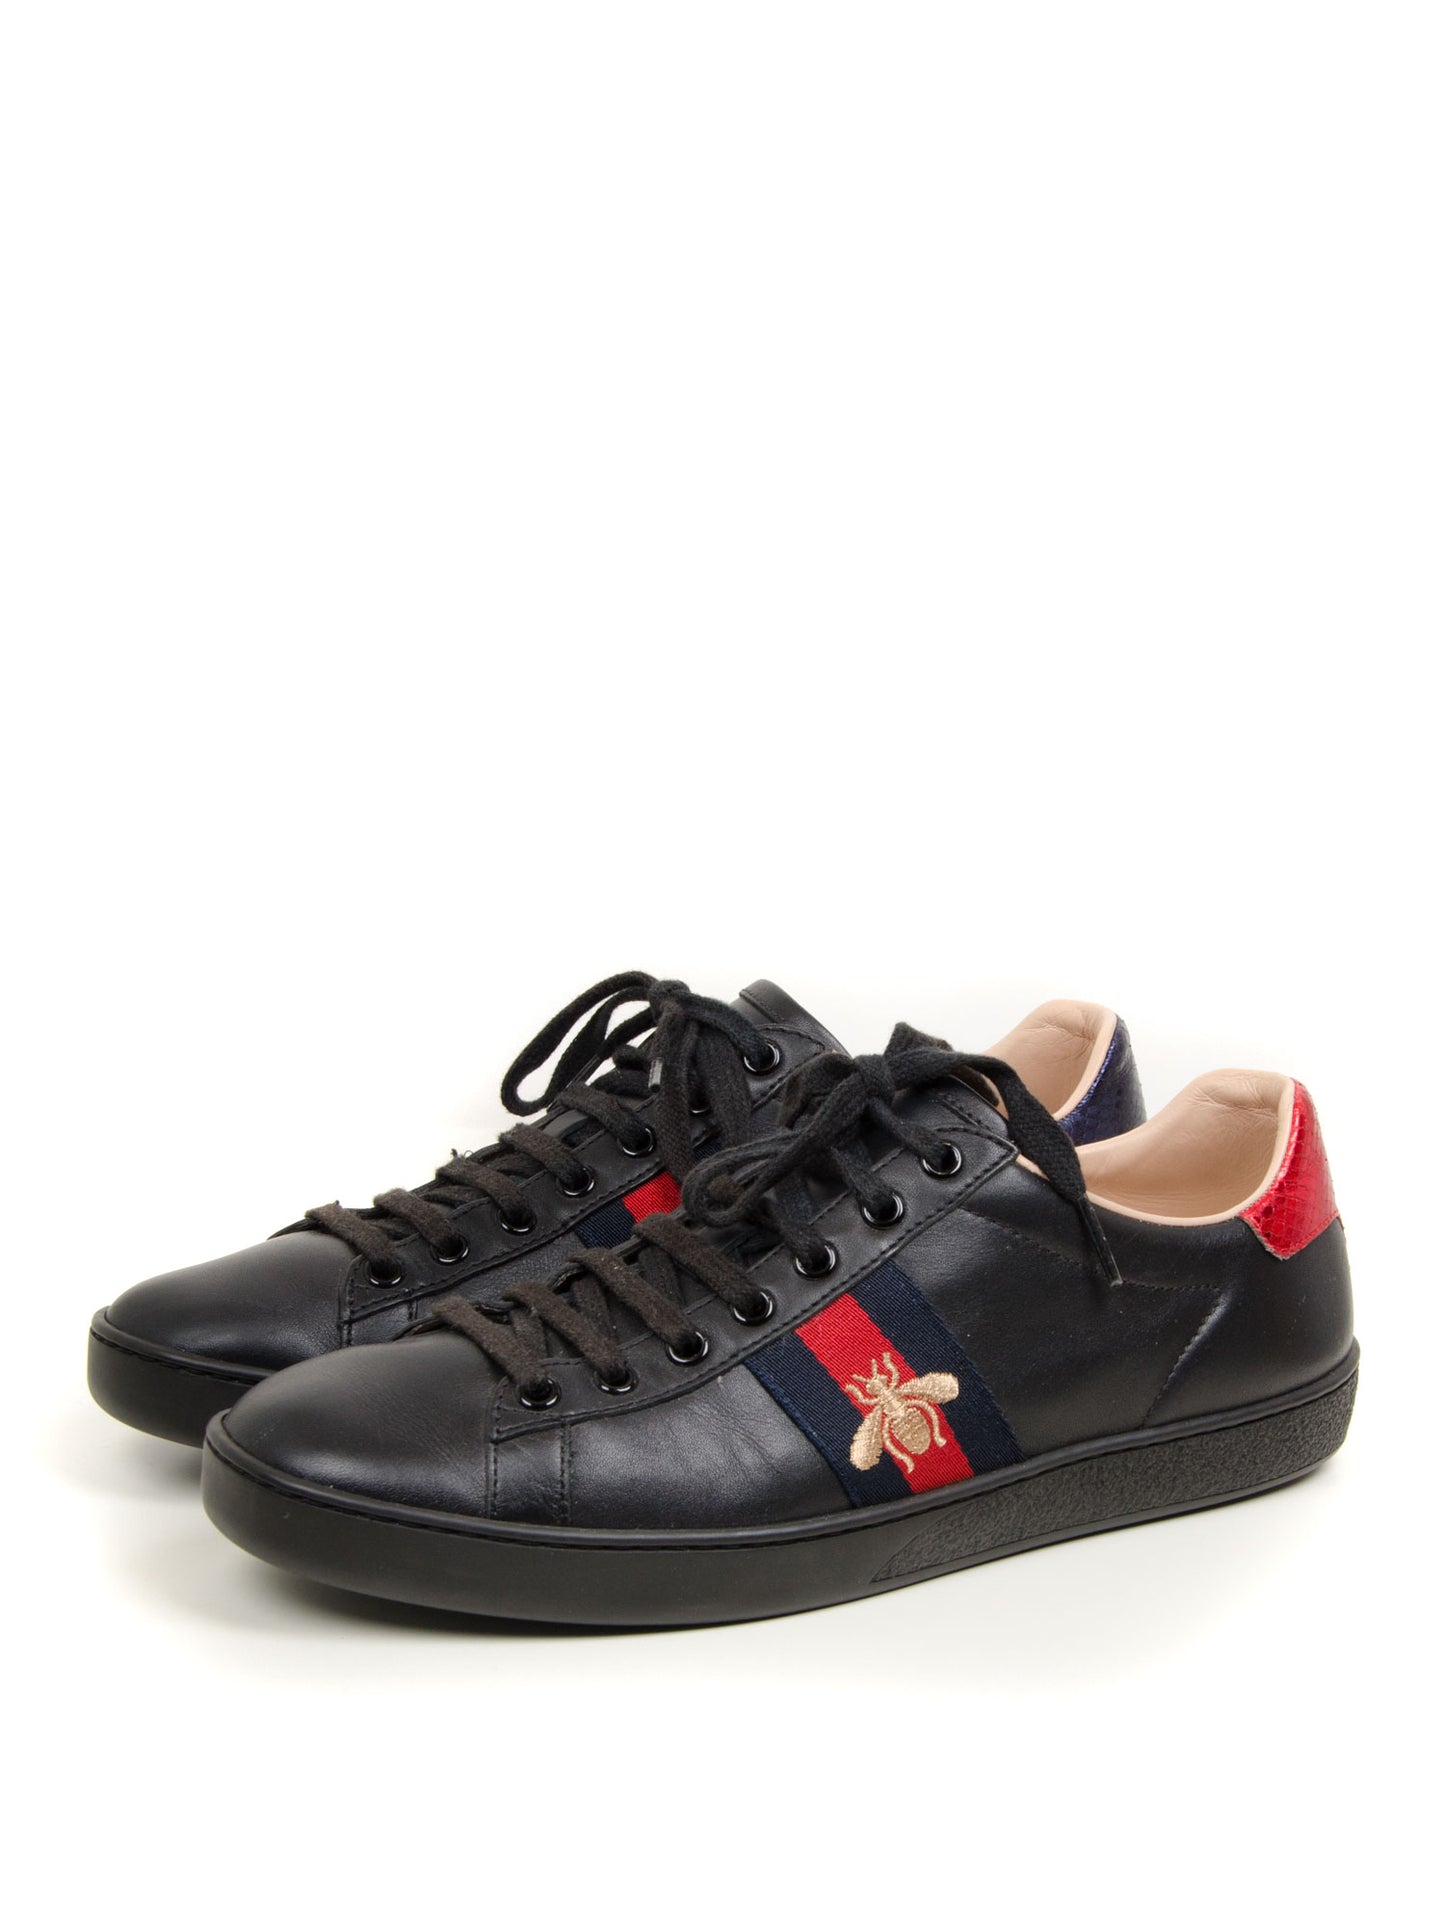 Ace Black Leather Bee Sneakers